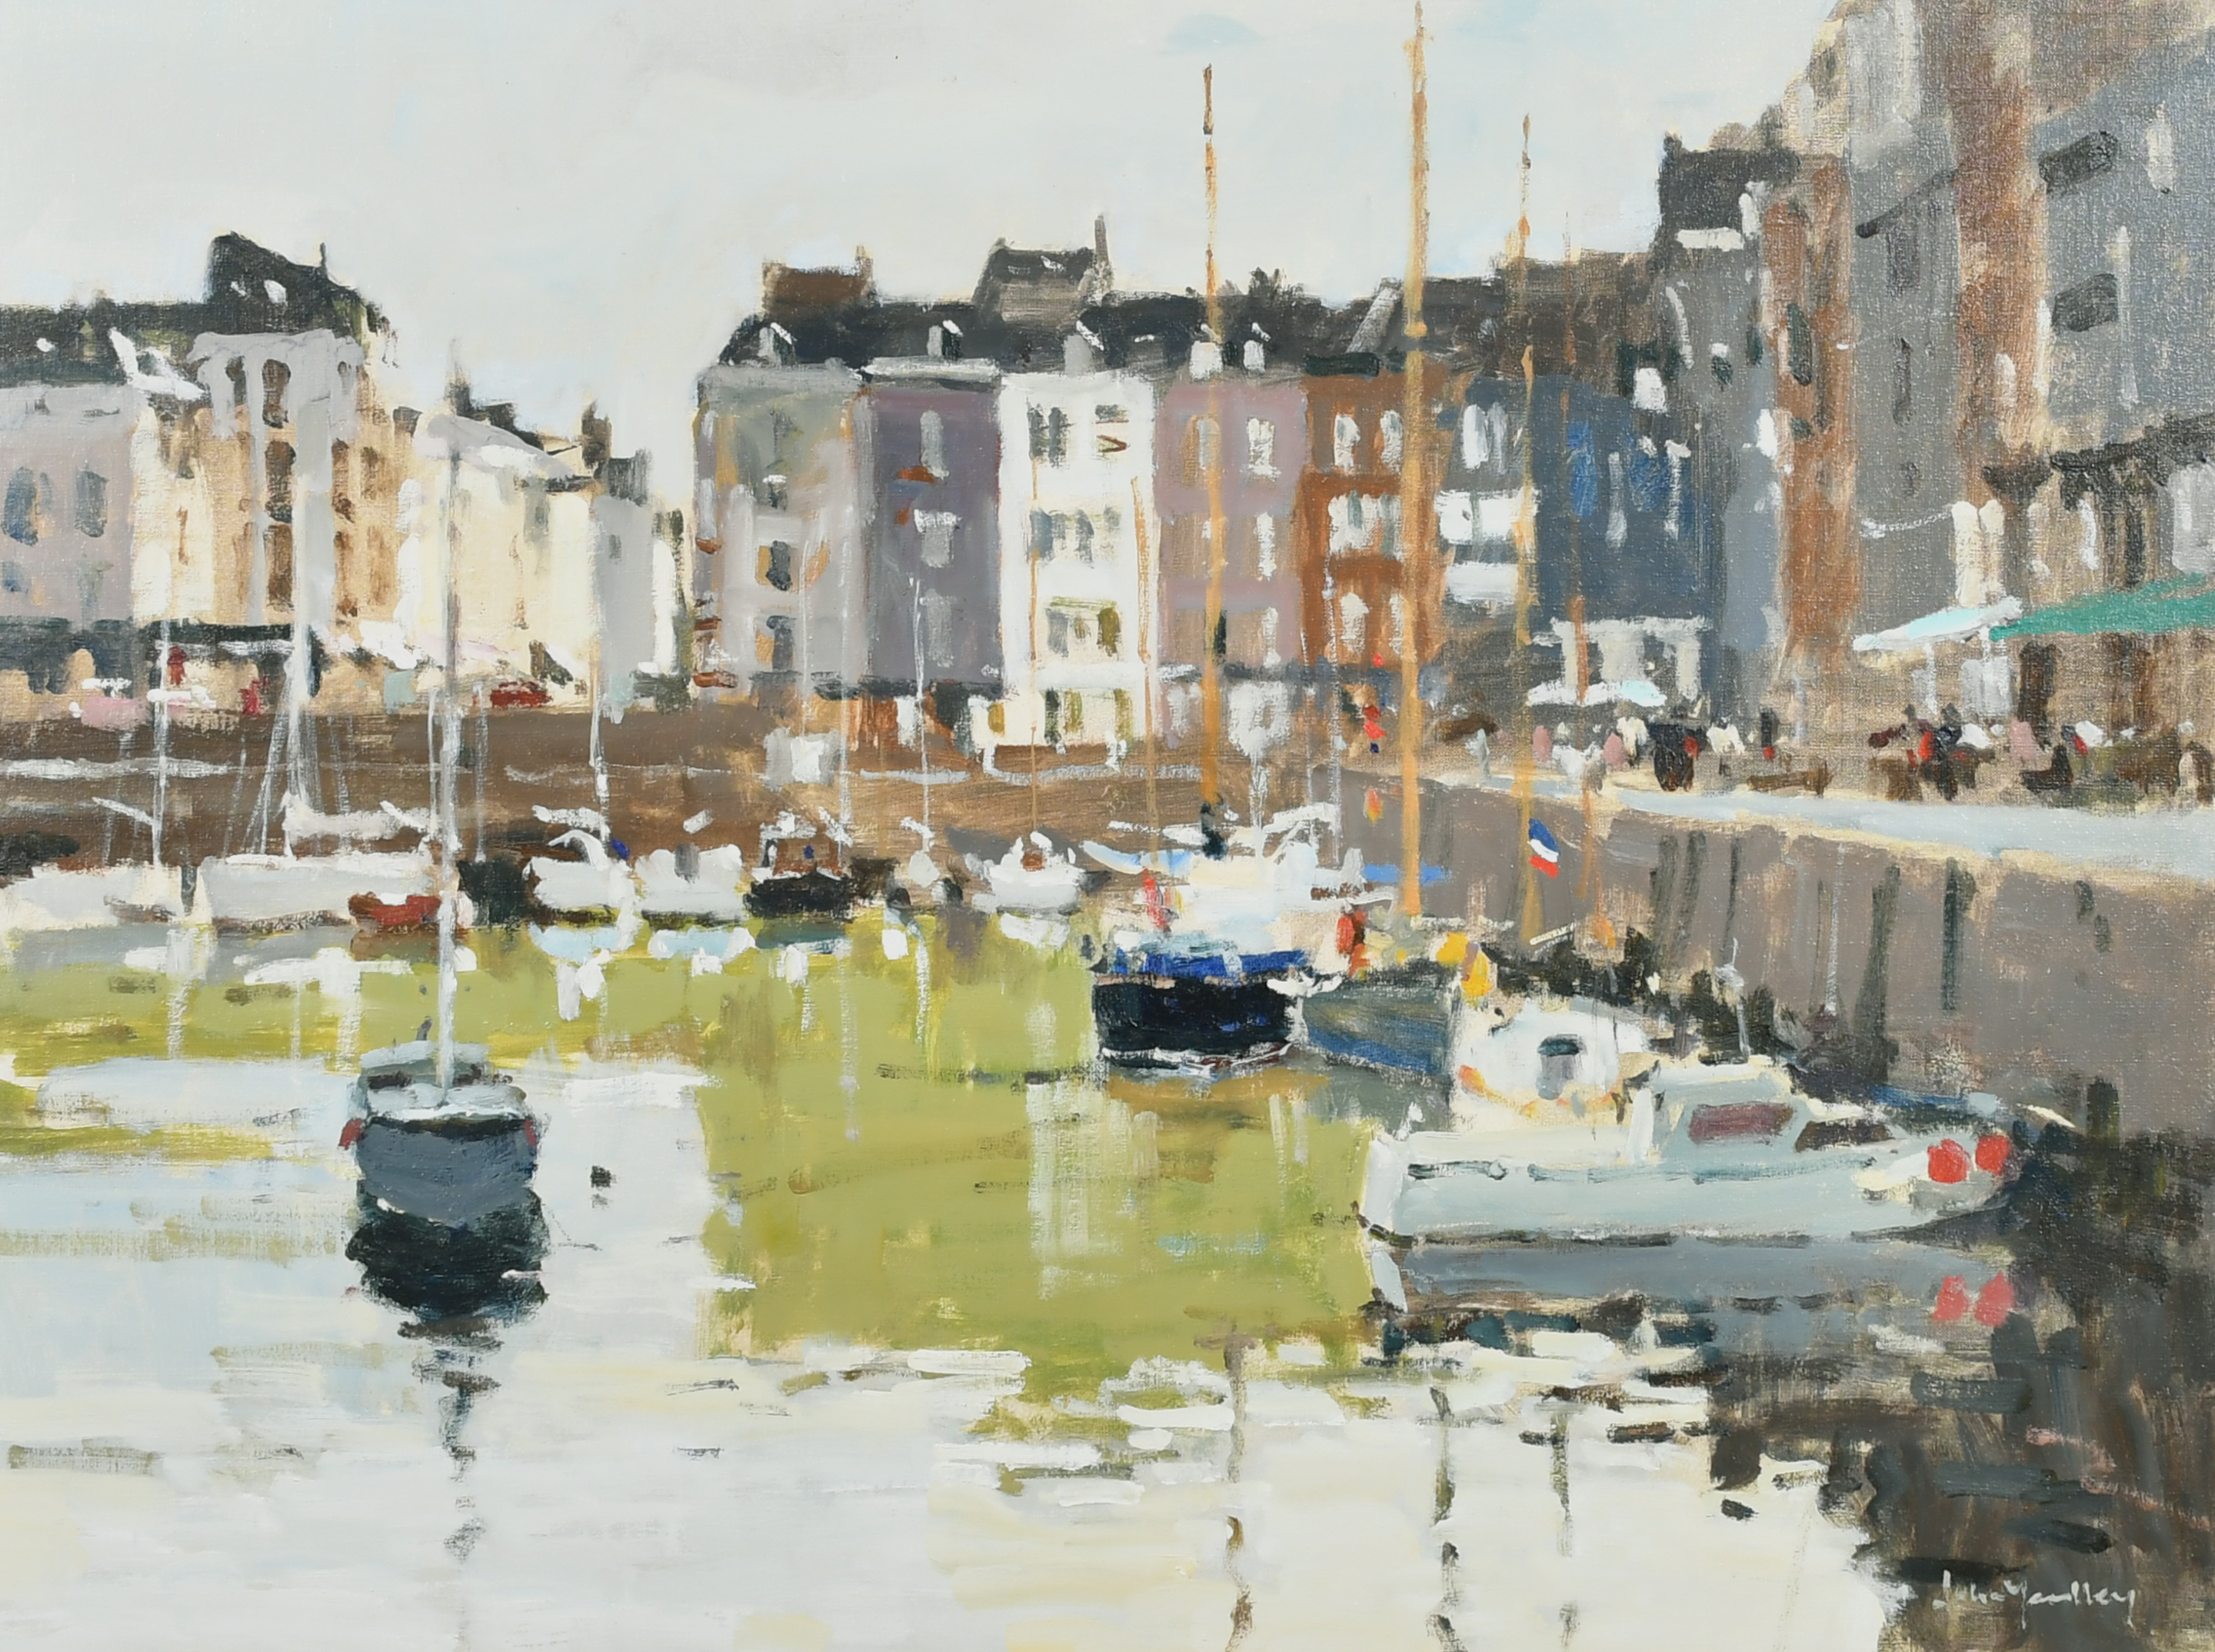 John Yardley (1933- ) British. "Inner Harbour - Honfleur", Oil on canvas, Signed, and inscribed on a